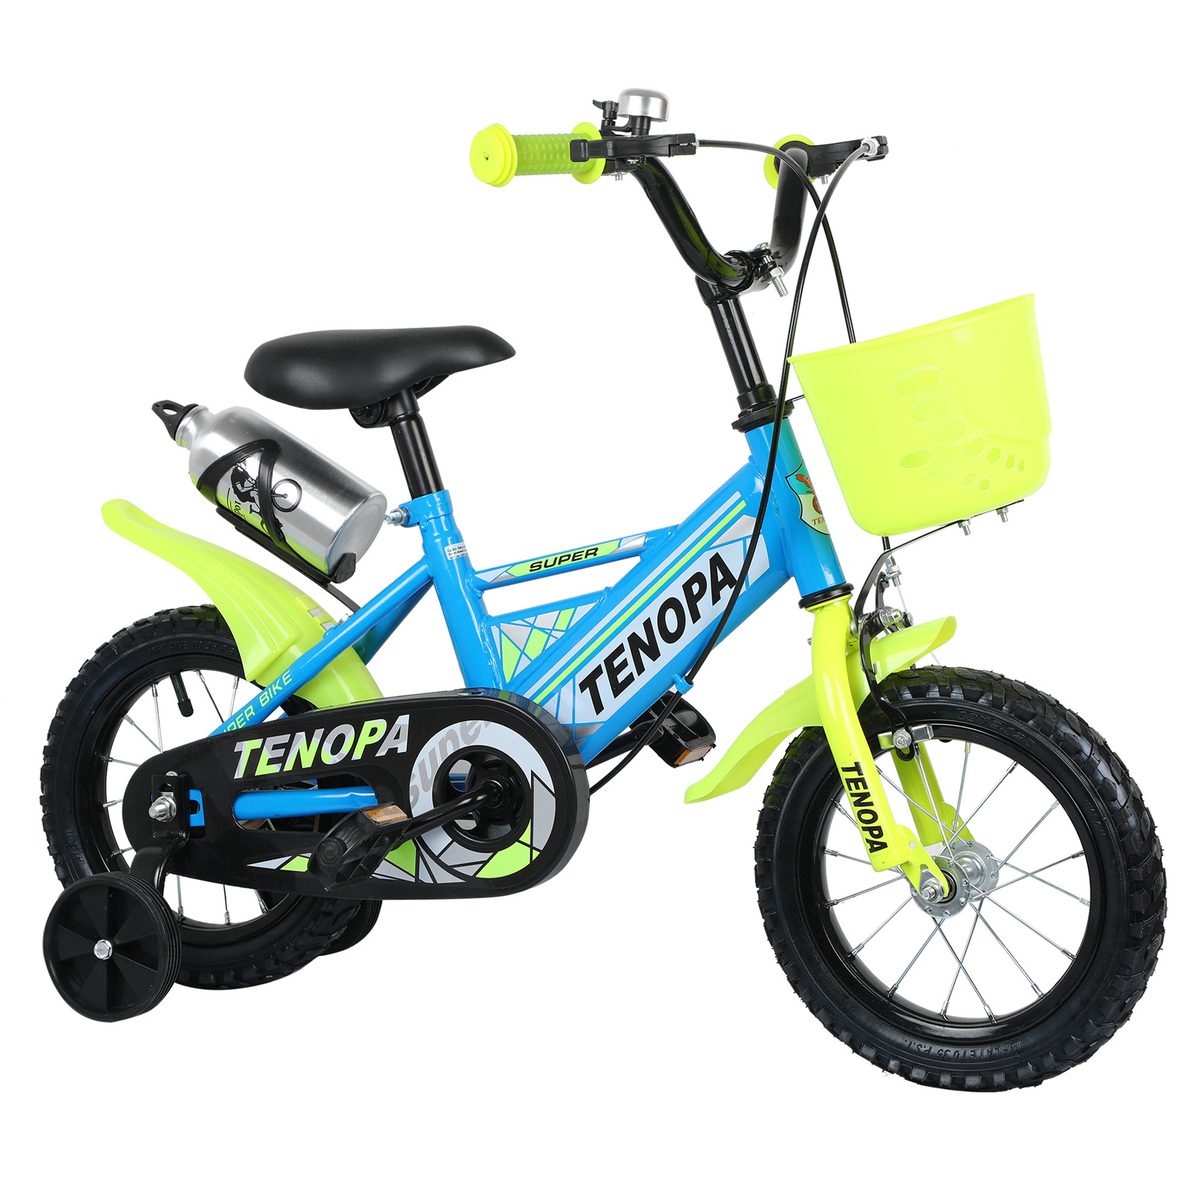 Tenopa Bicycle YSP1001 14 14" Assorted colors